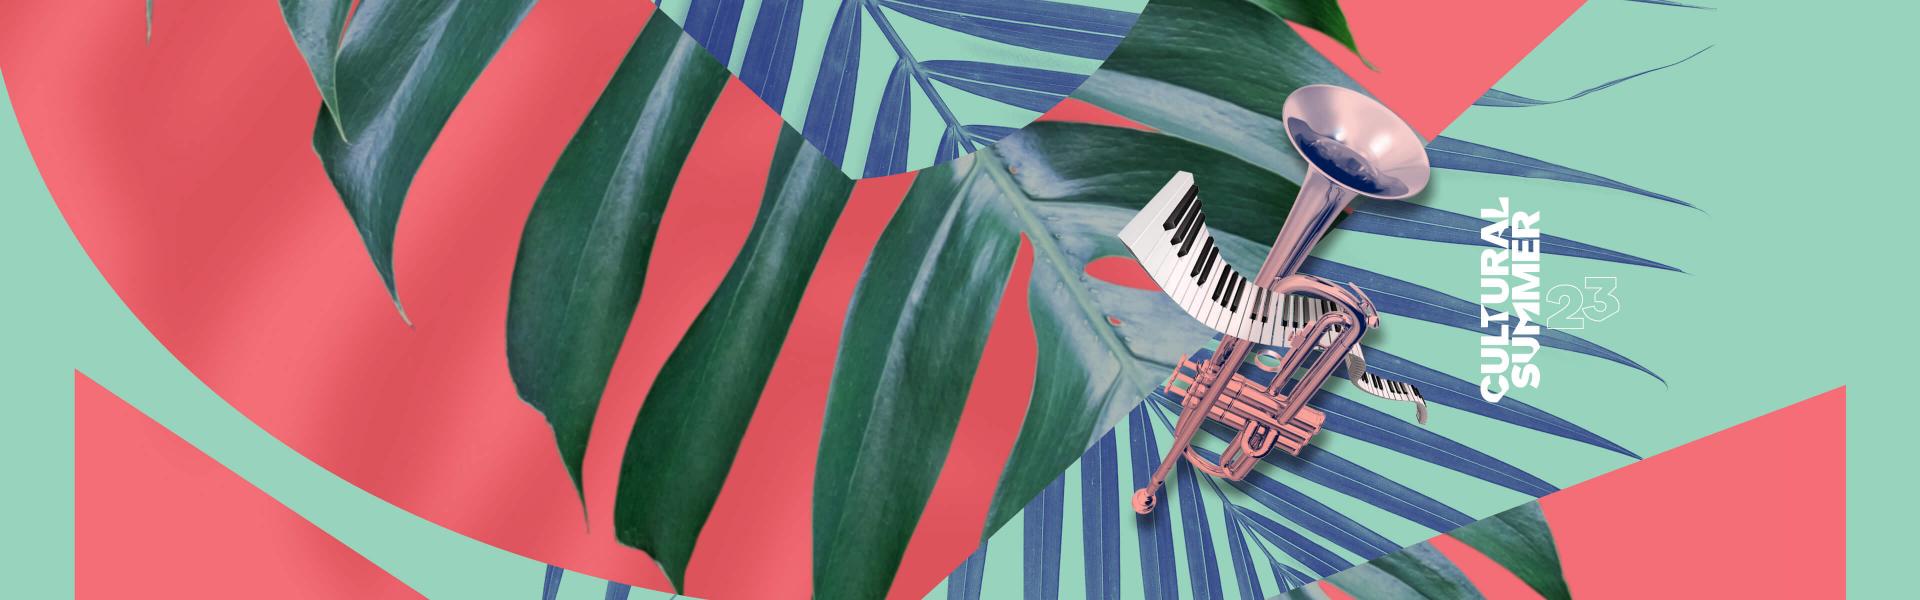 Colorful graphic with leaves, piano keyboard and trumpet.